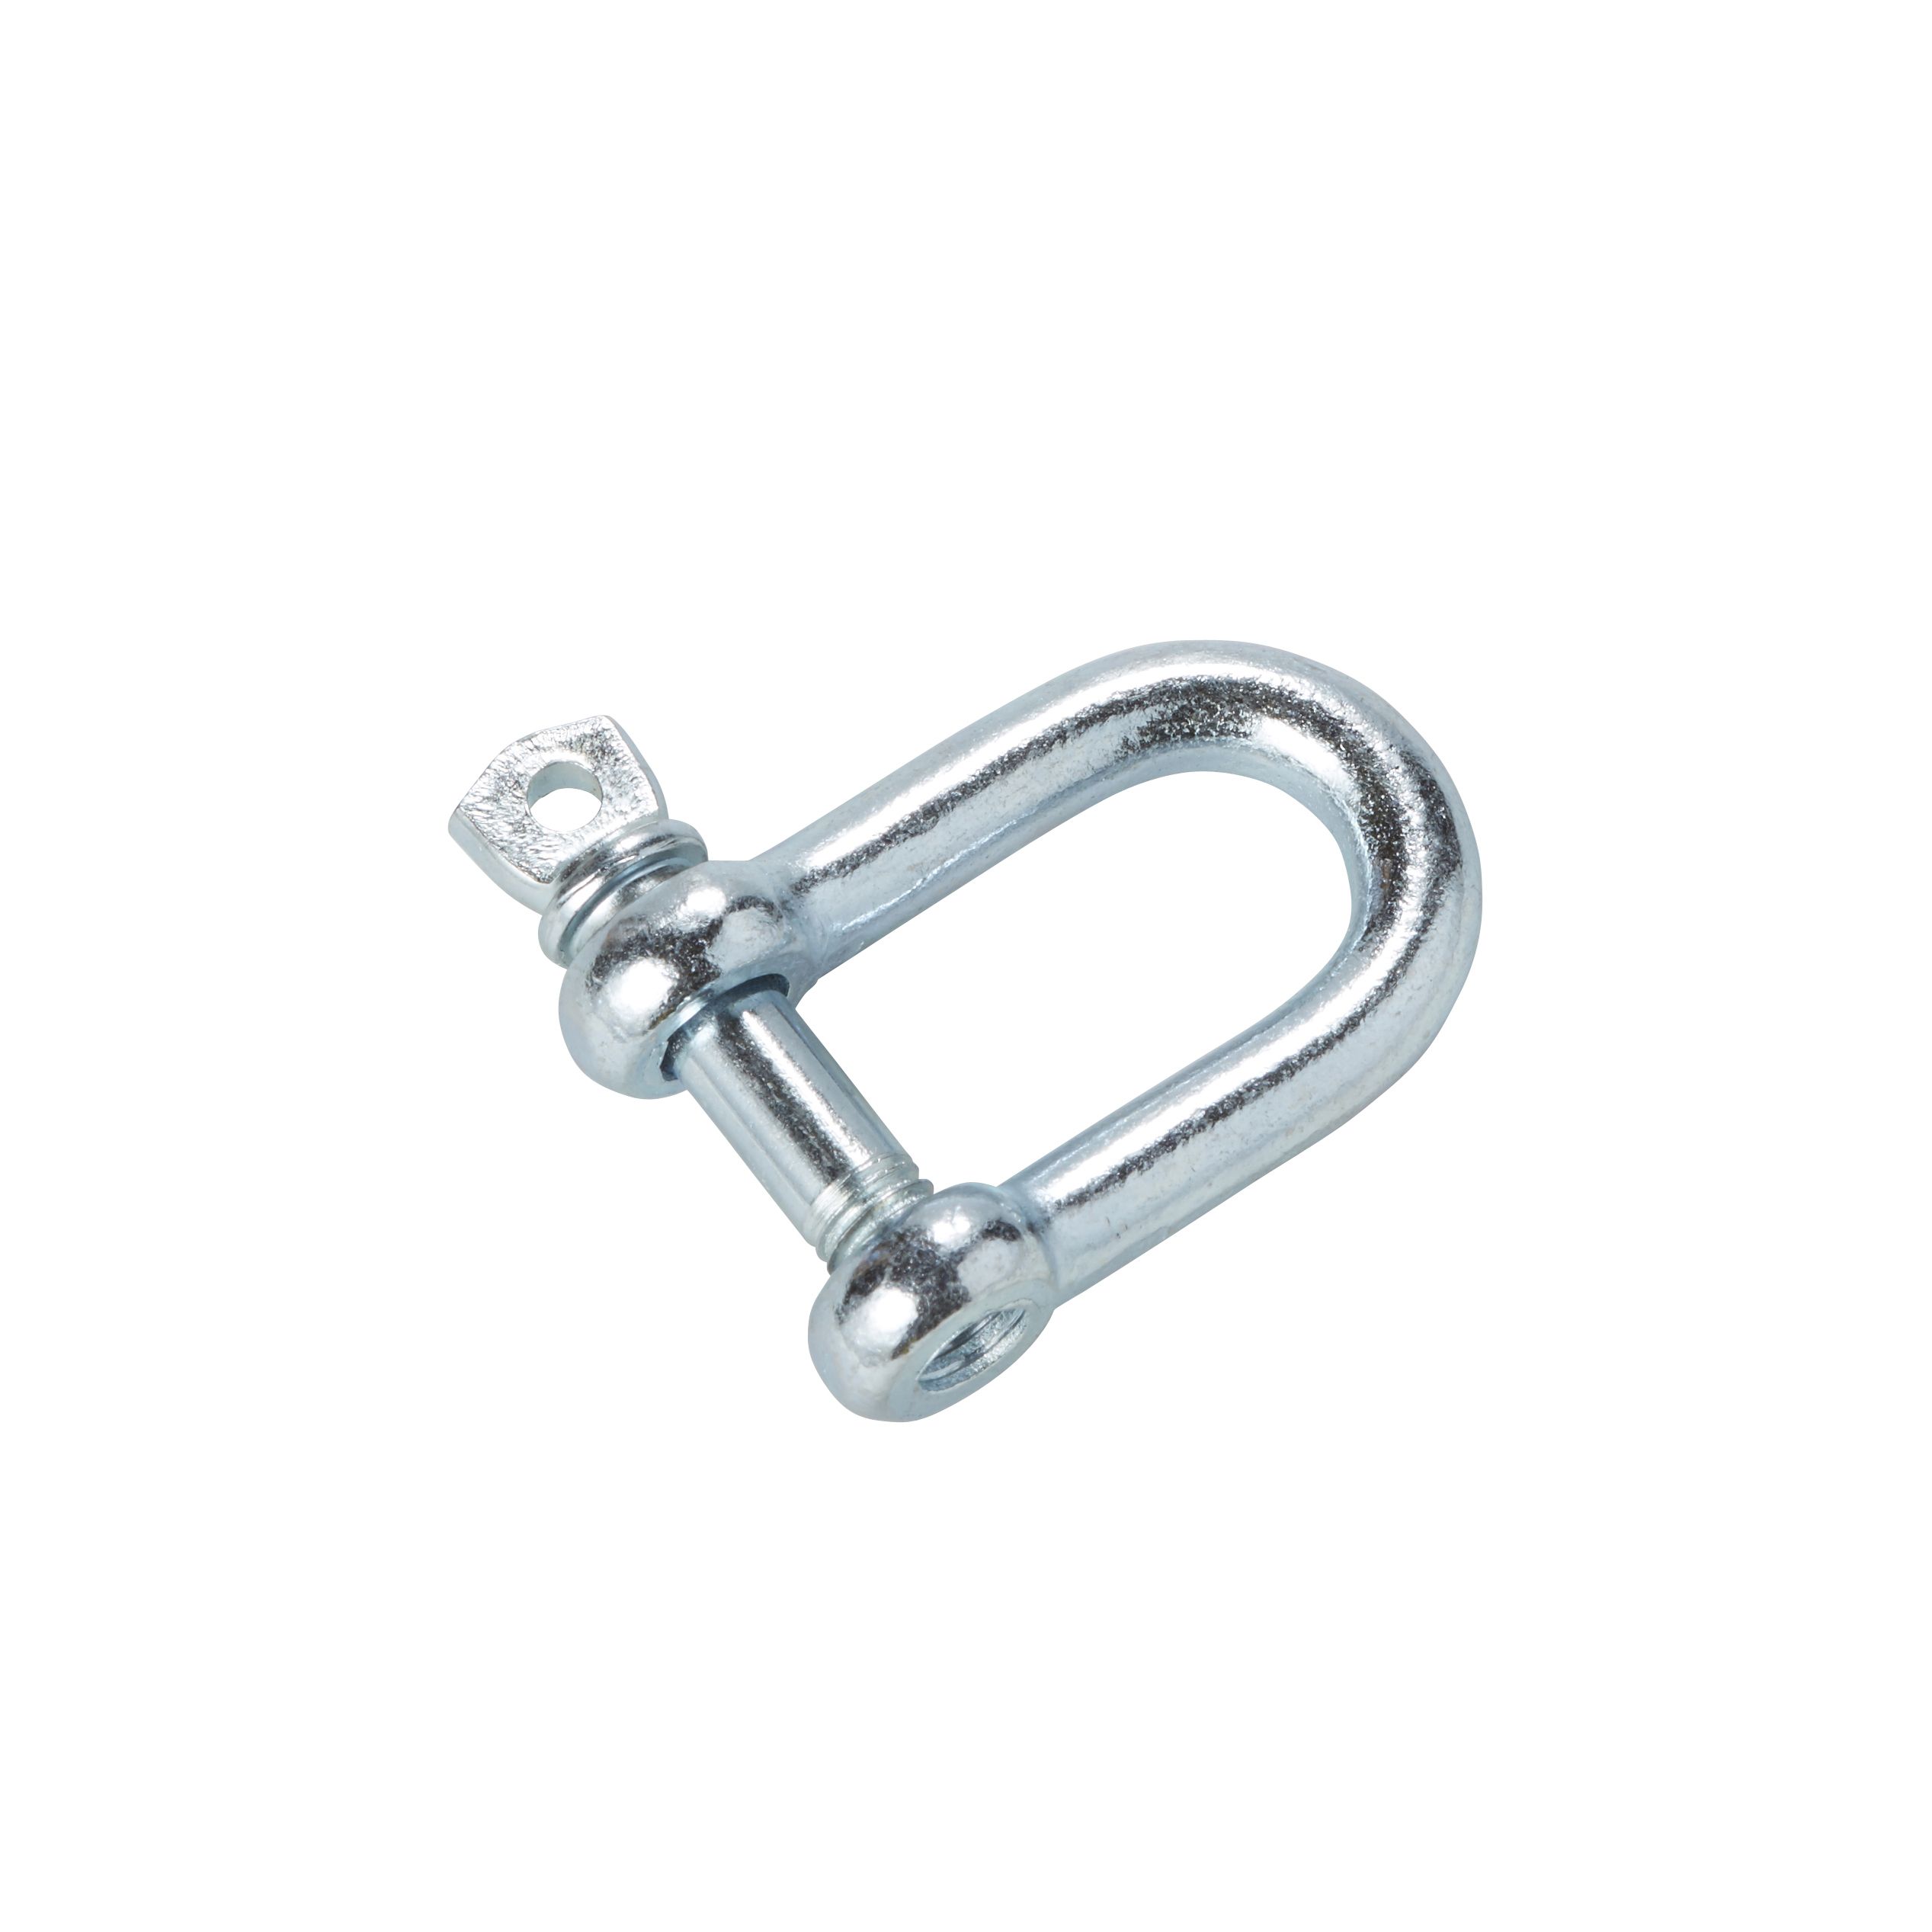 Diall Steel D-shackle (Dia)10mm